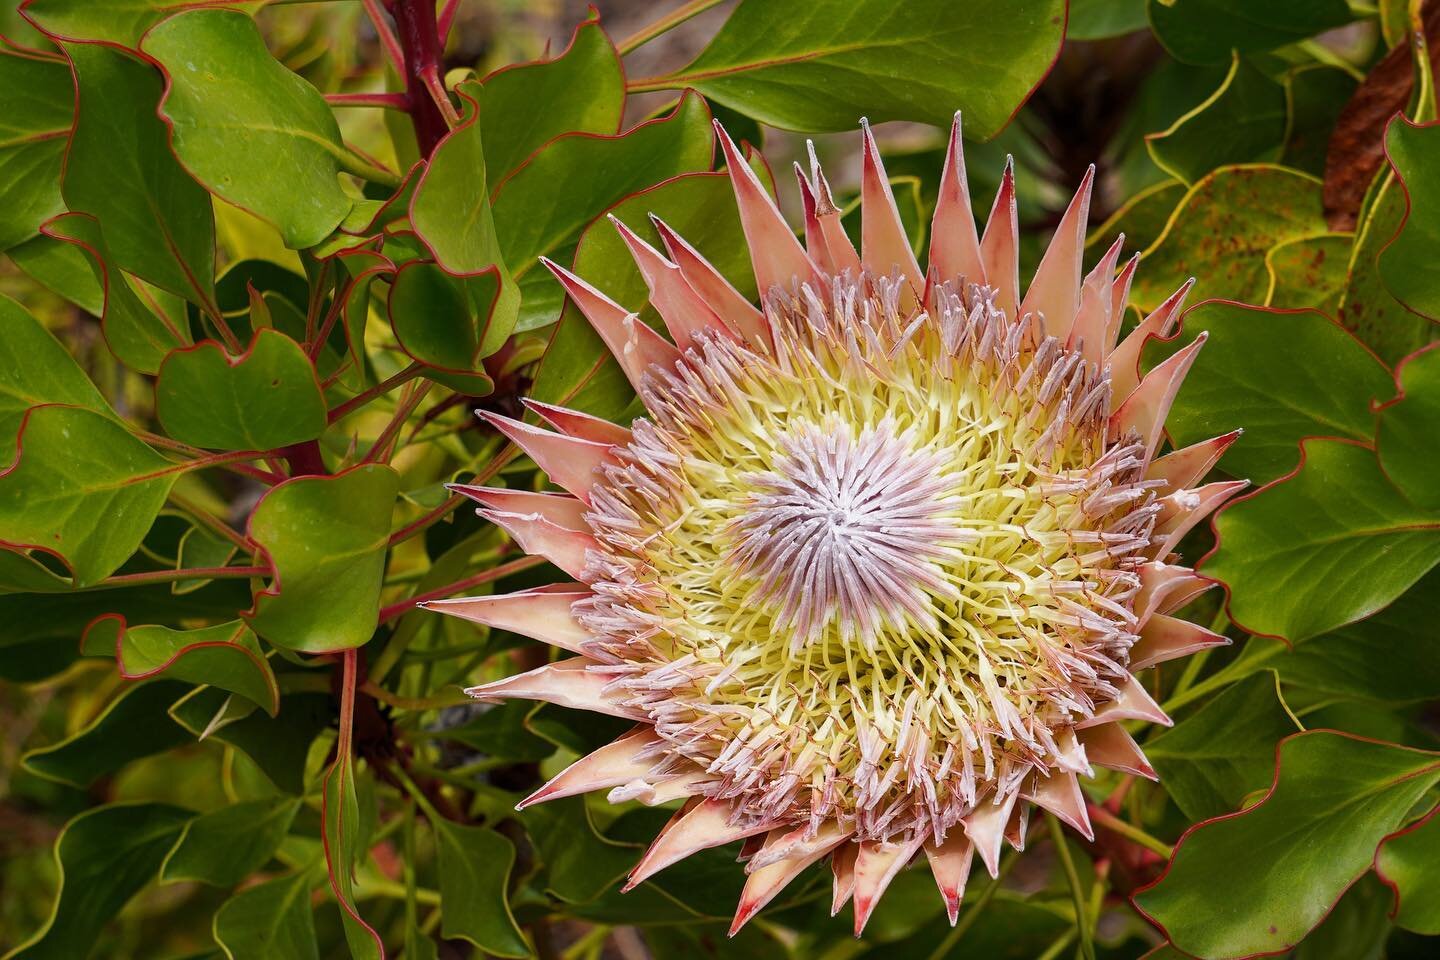 King protea (Protea cynaroides)

This showy, huge flower is the national flower of South Africa. It&rsquo;s a huge dome shaped flower, ranging from 5-12 inches in diameter. The flower head, which is composed of many tepaled inner flowers, is surround